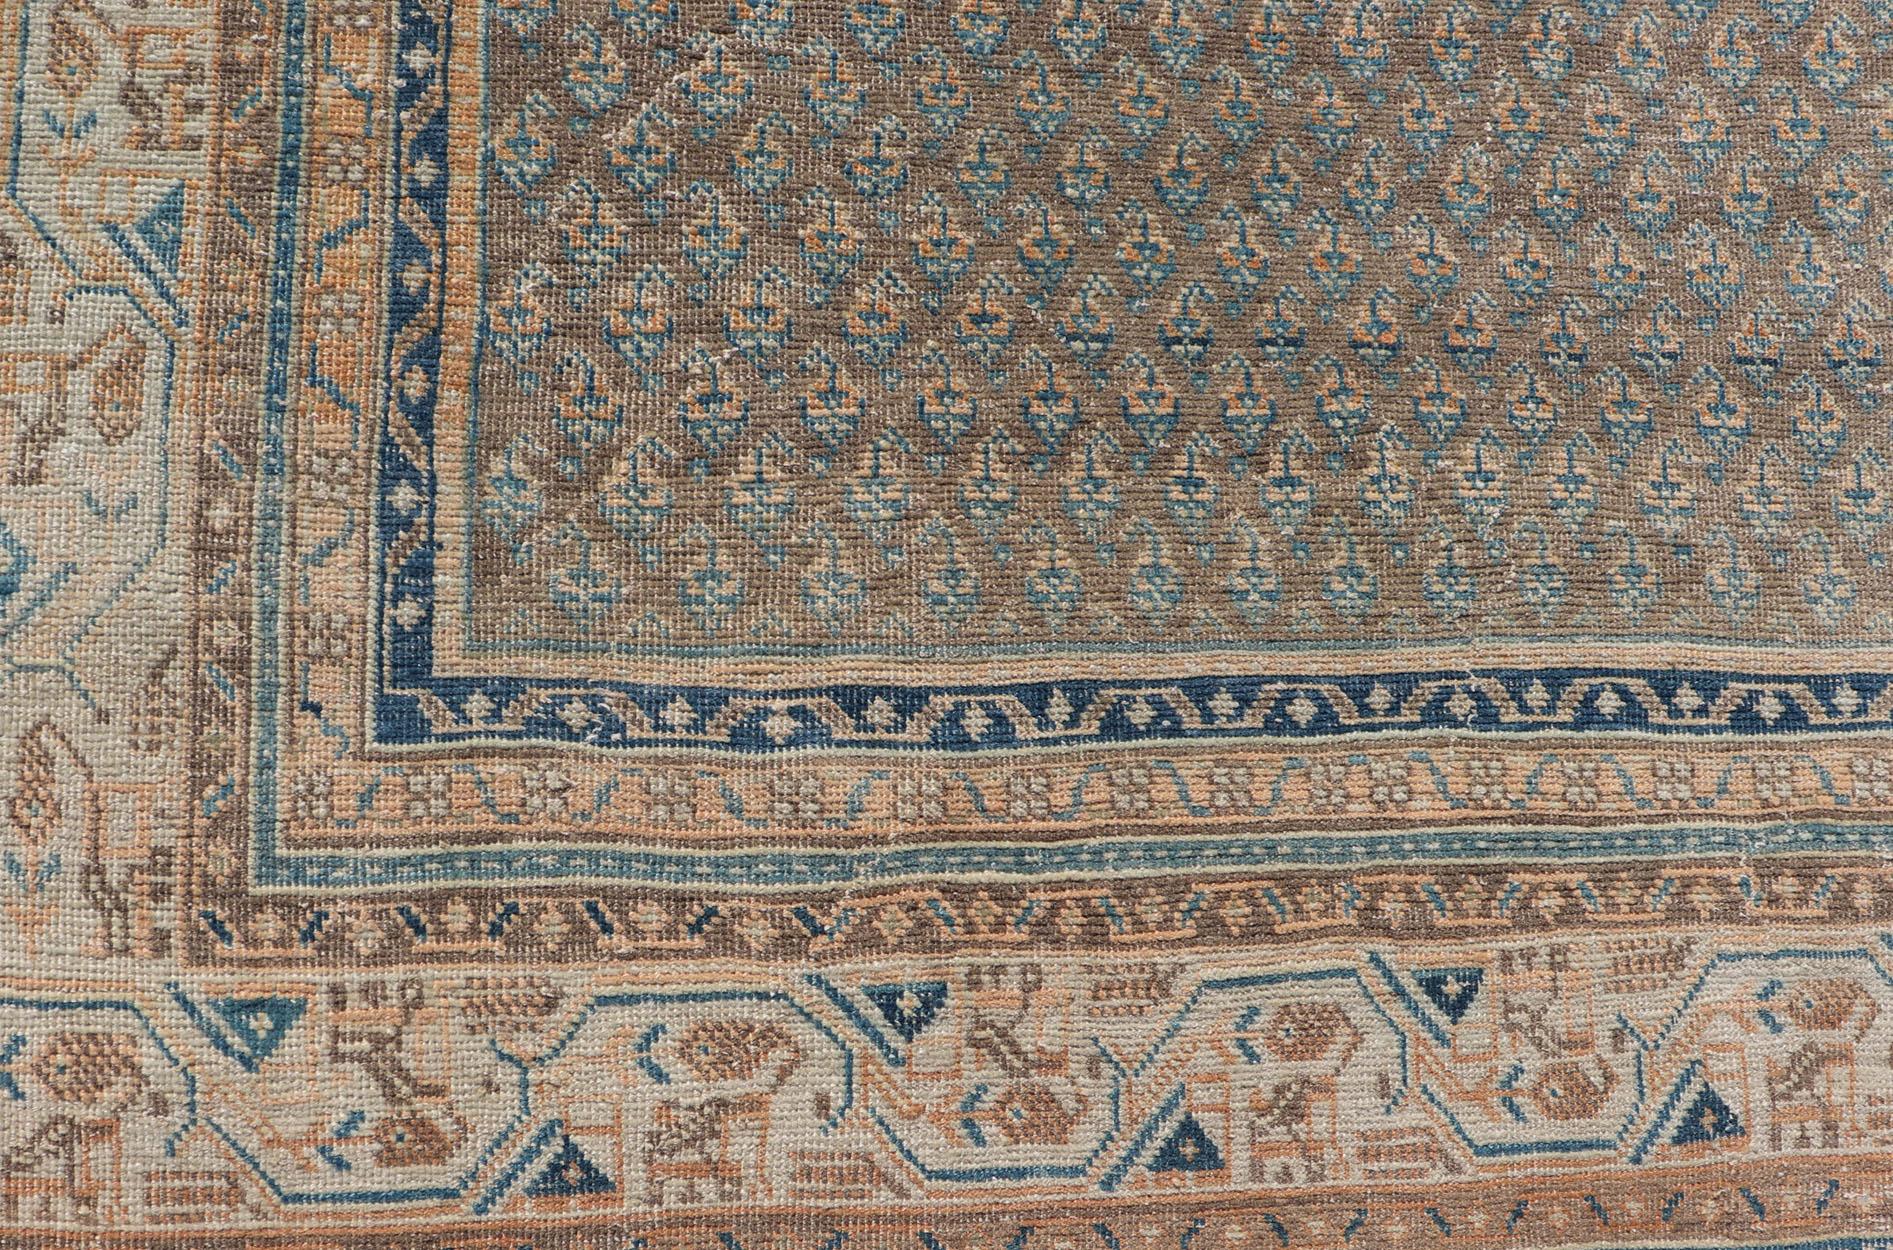 Mid-20th Century Persian Tabriz Rug with All-Over Saraband Design in Brown and Blue